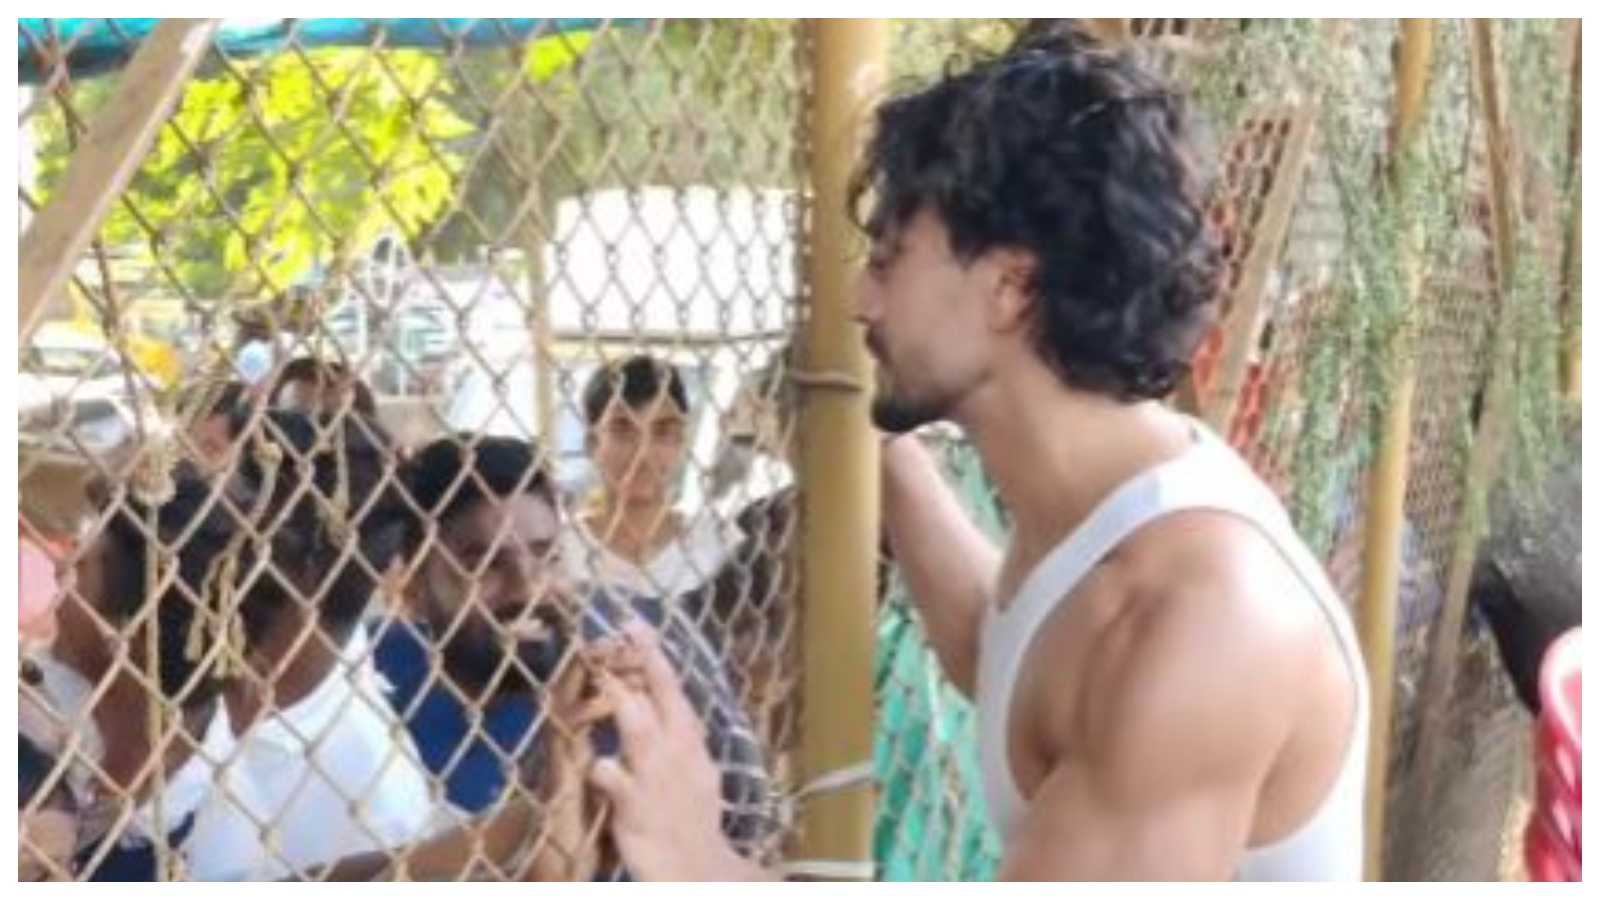 'Tiger in zoo': Tiger Shroff meeting fans behind fence triggers hilarious reactions